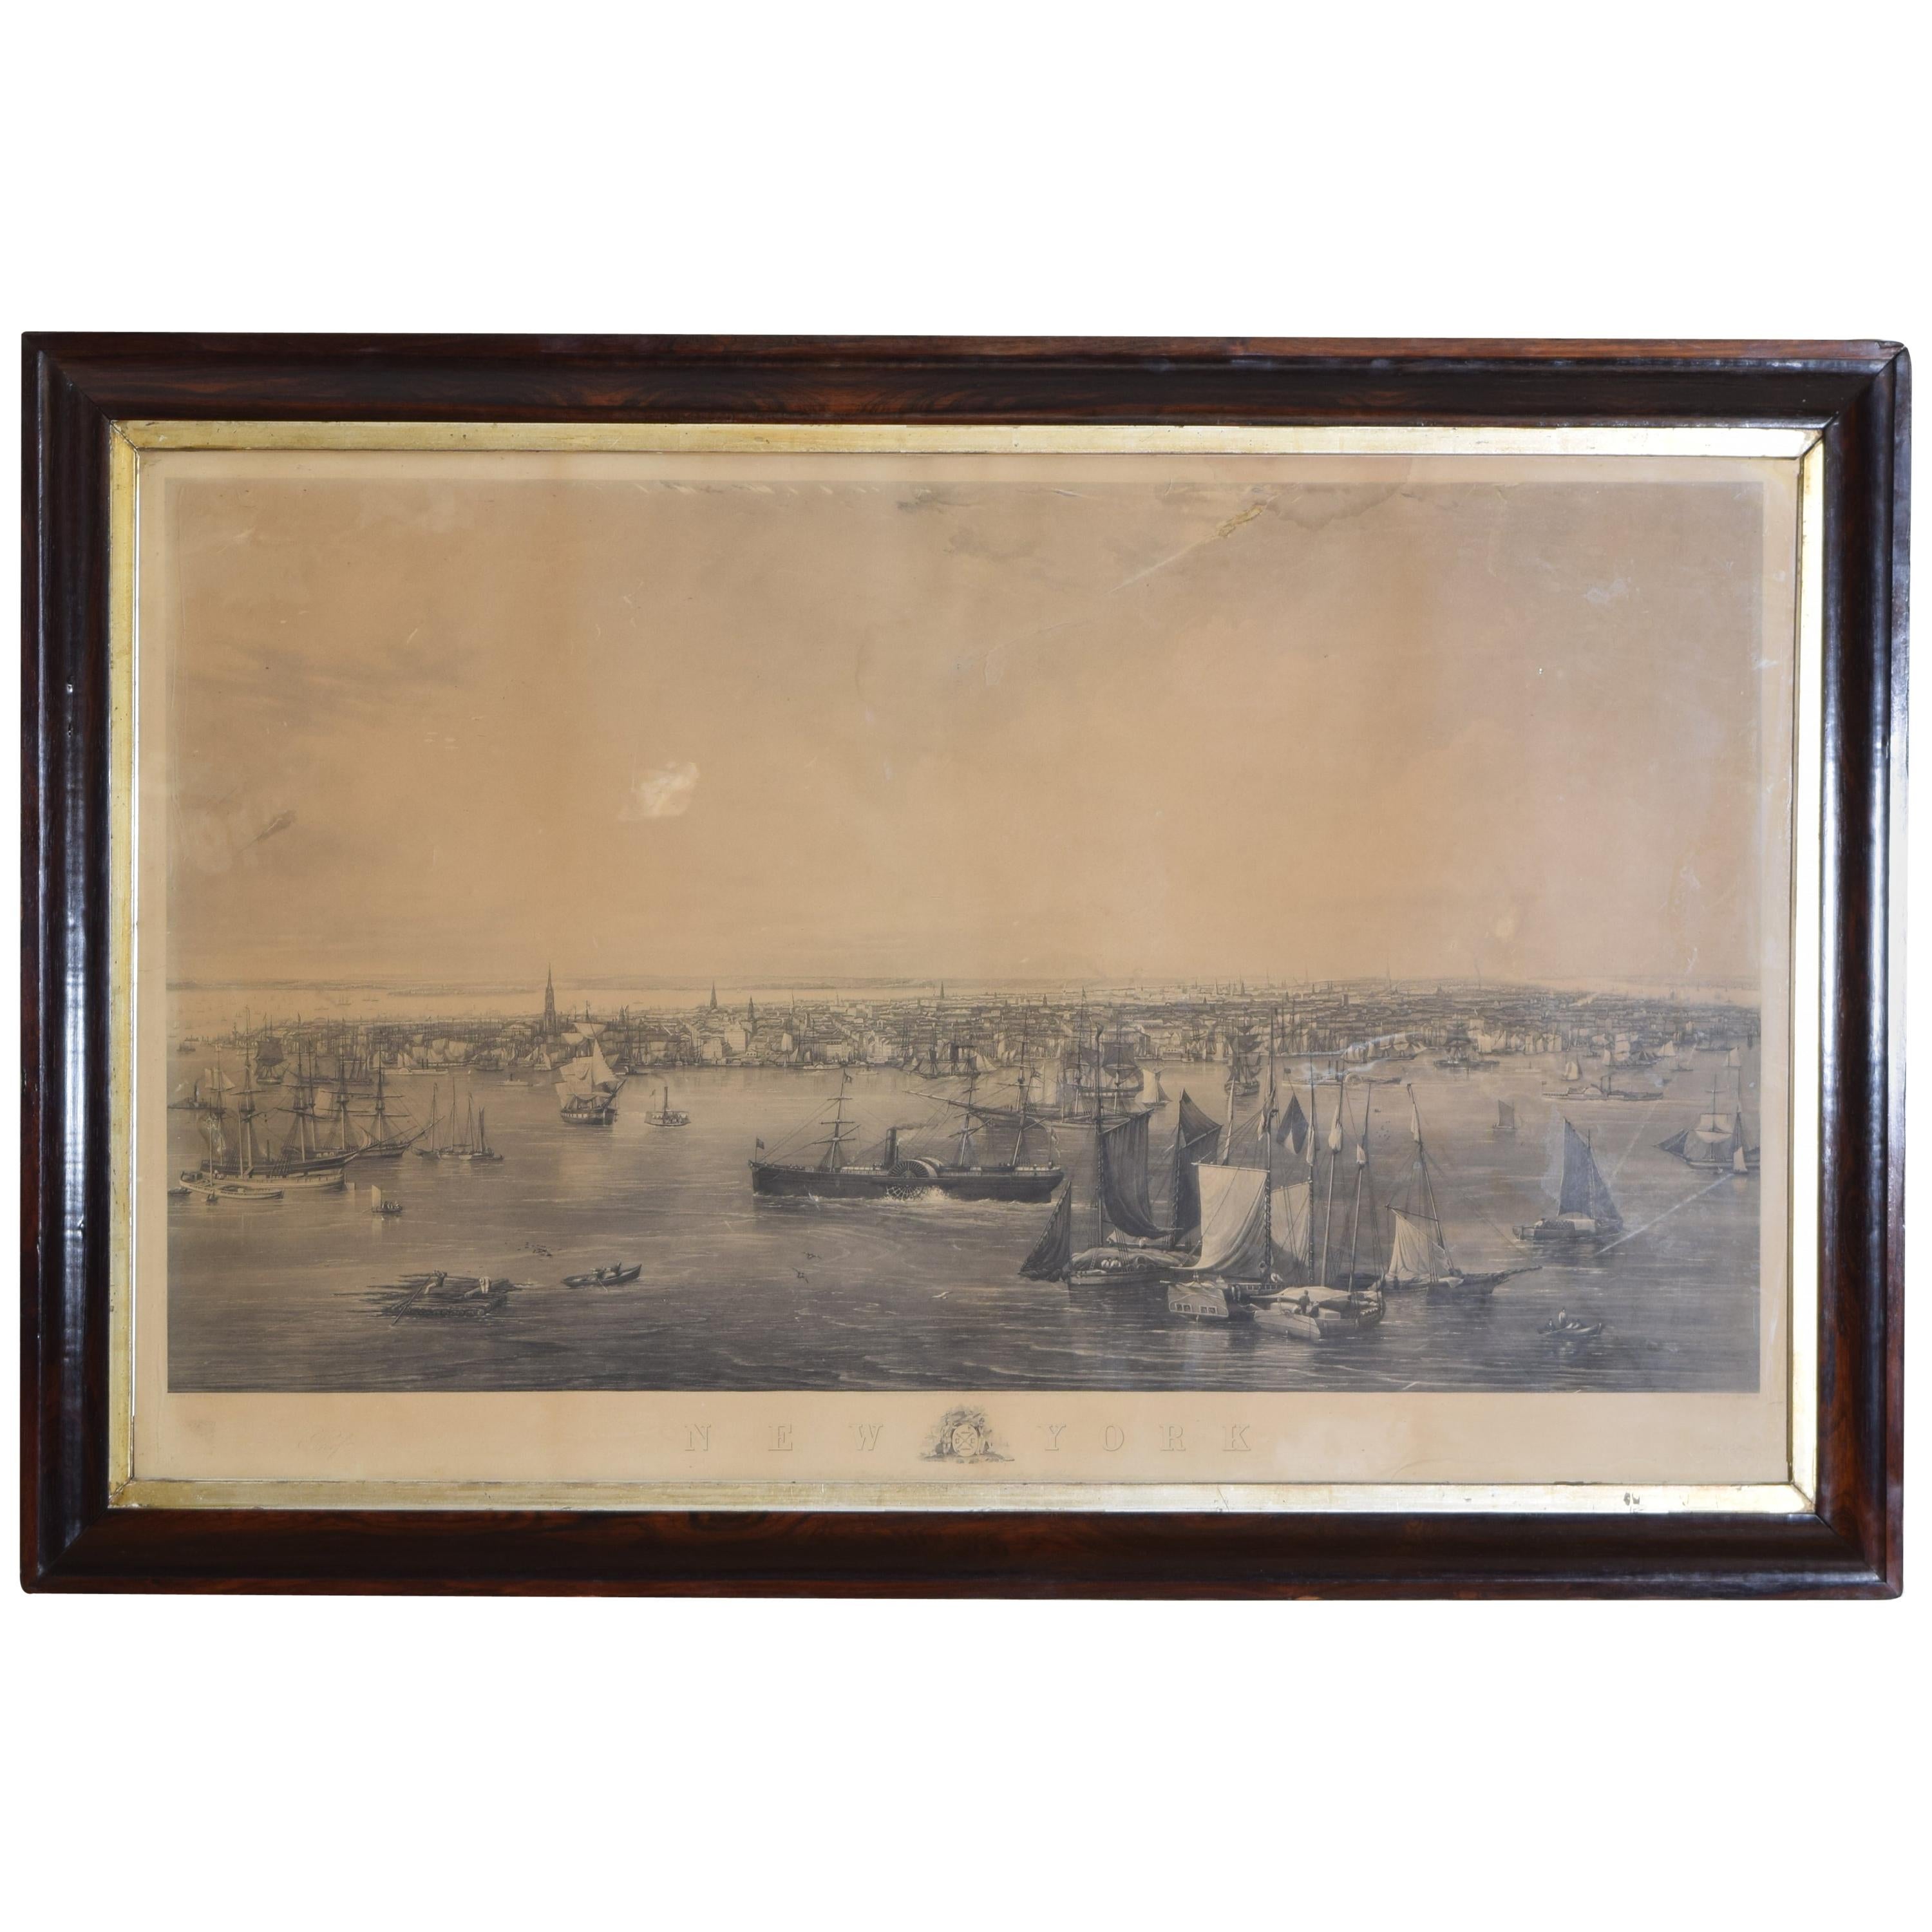 Large Engraving of New York Harbor in Period Rosewood Frame, ca. 1855